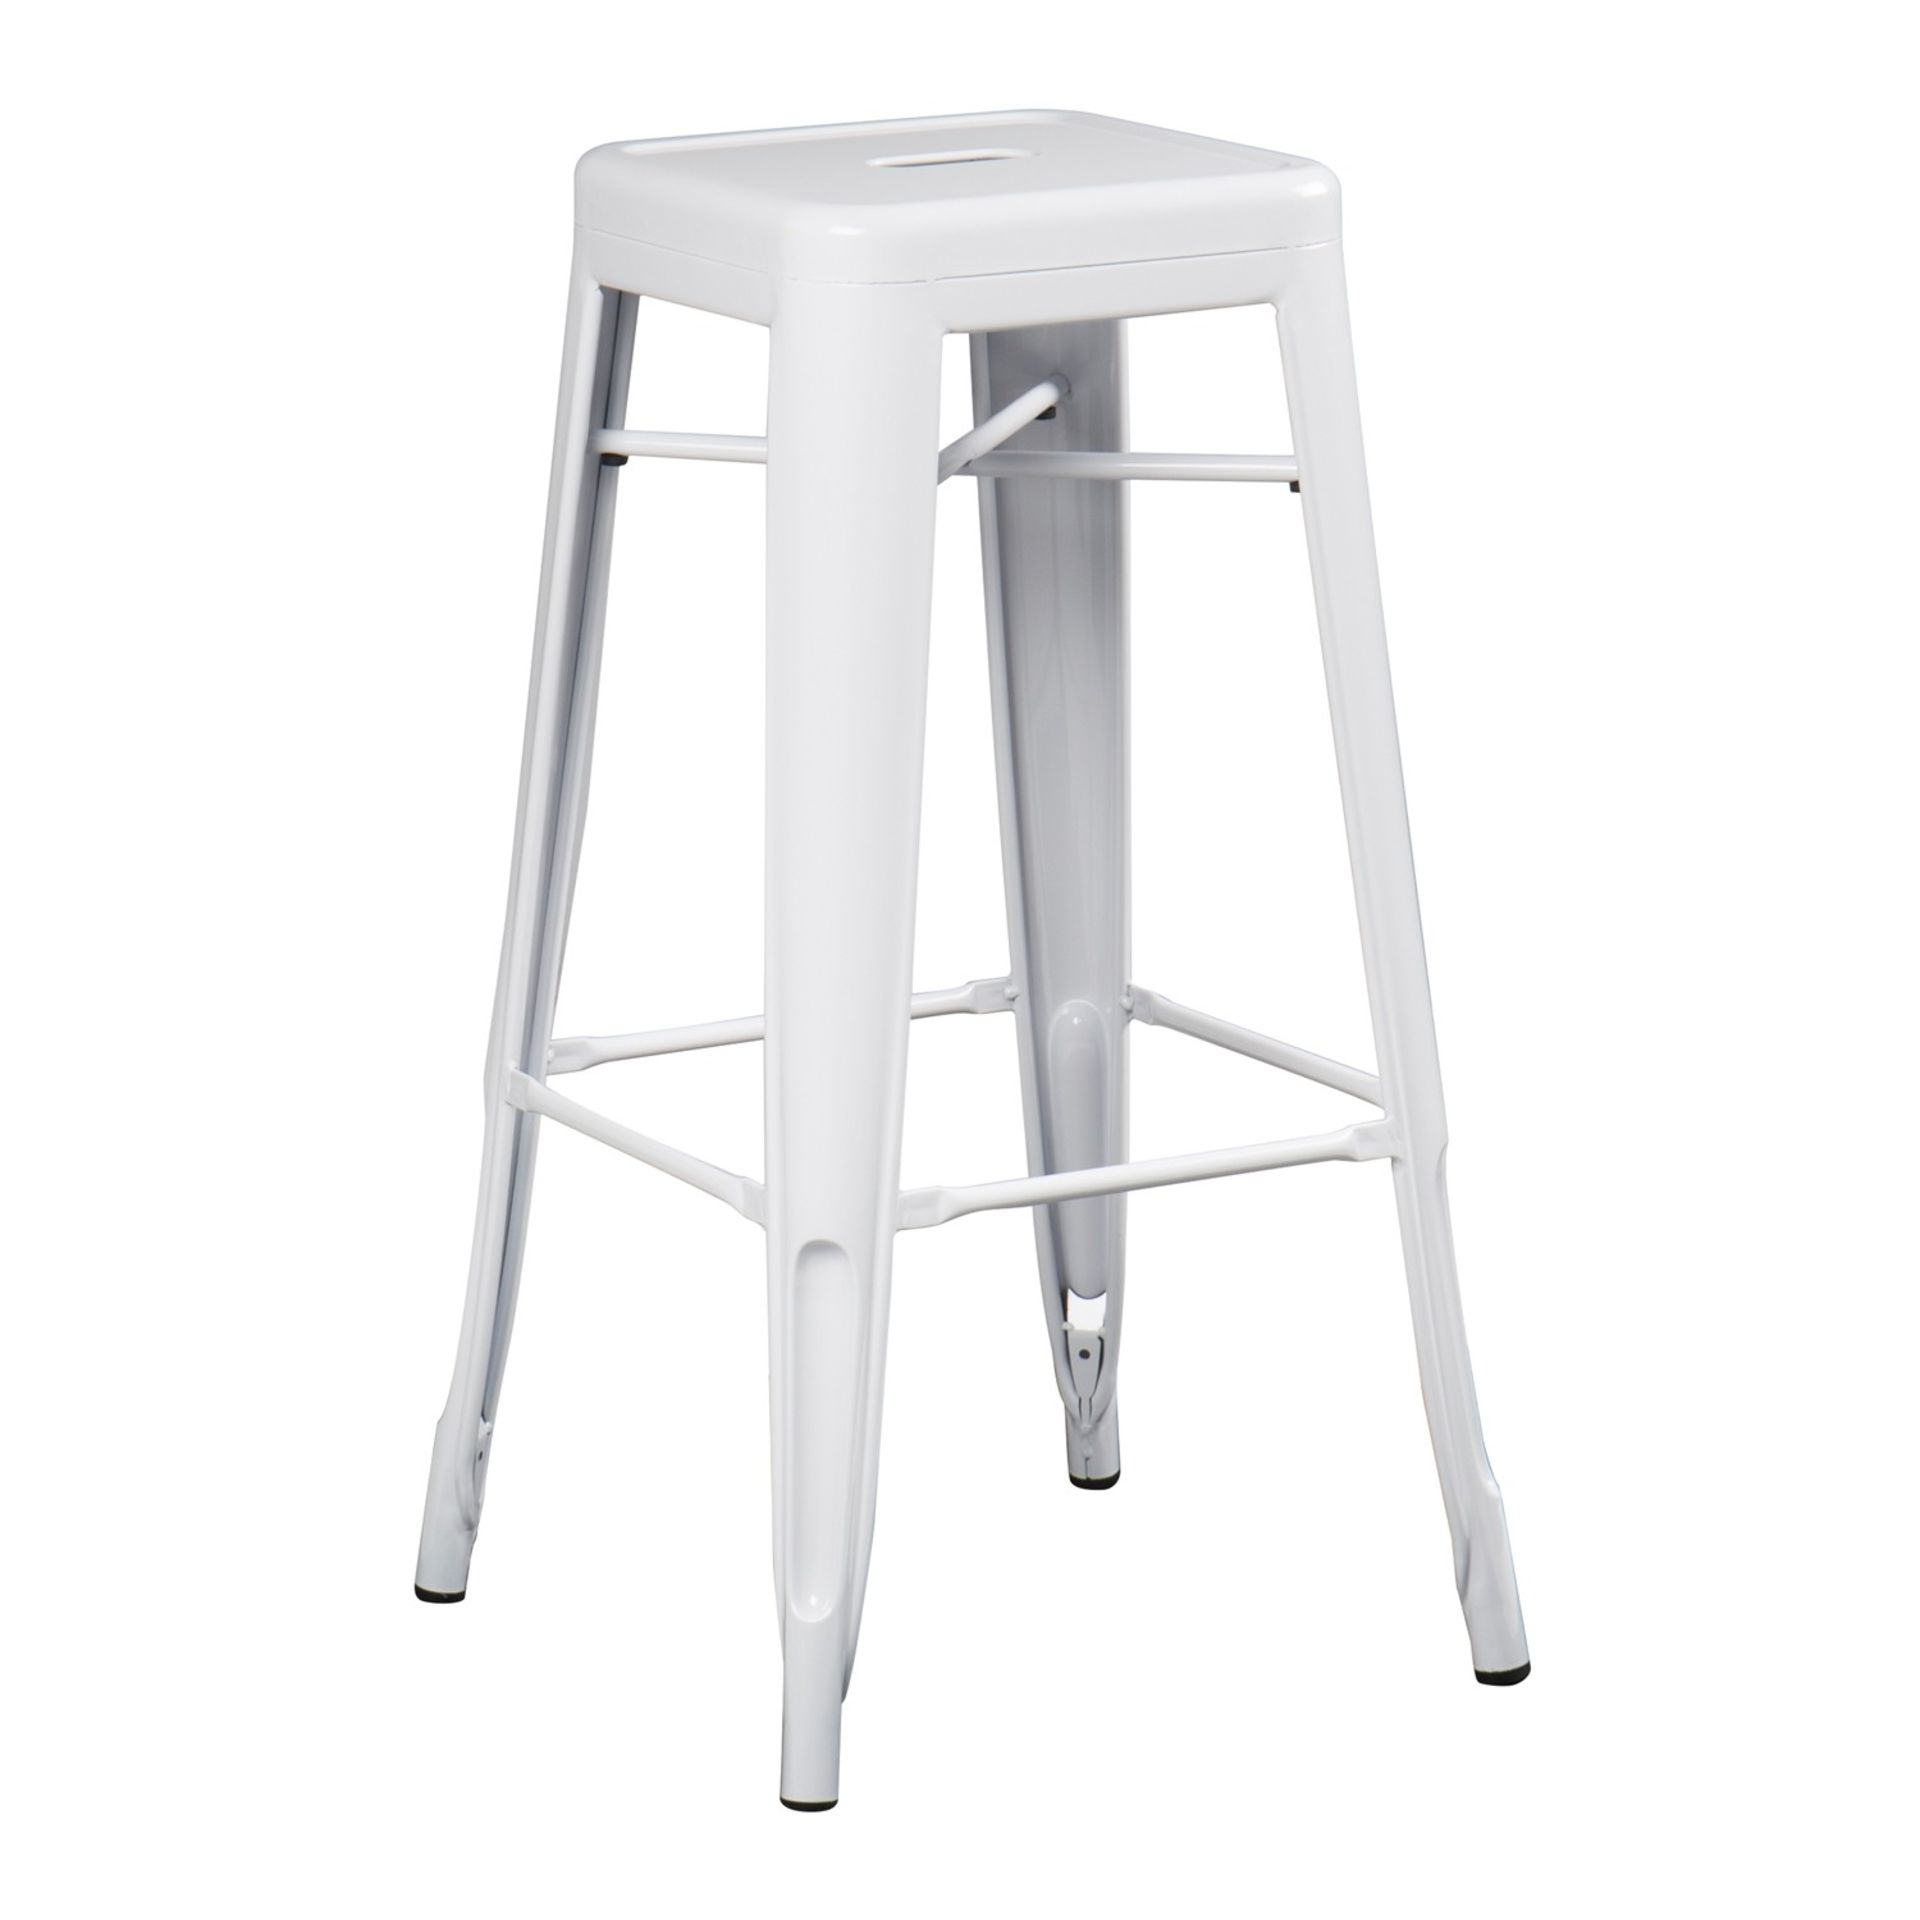 2 x Xavier Pauchard Inspired Industrial White Bar Stools - Pair of - Lightweight and Stackable - - Image 3 of 4